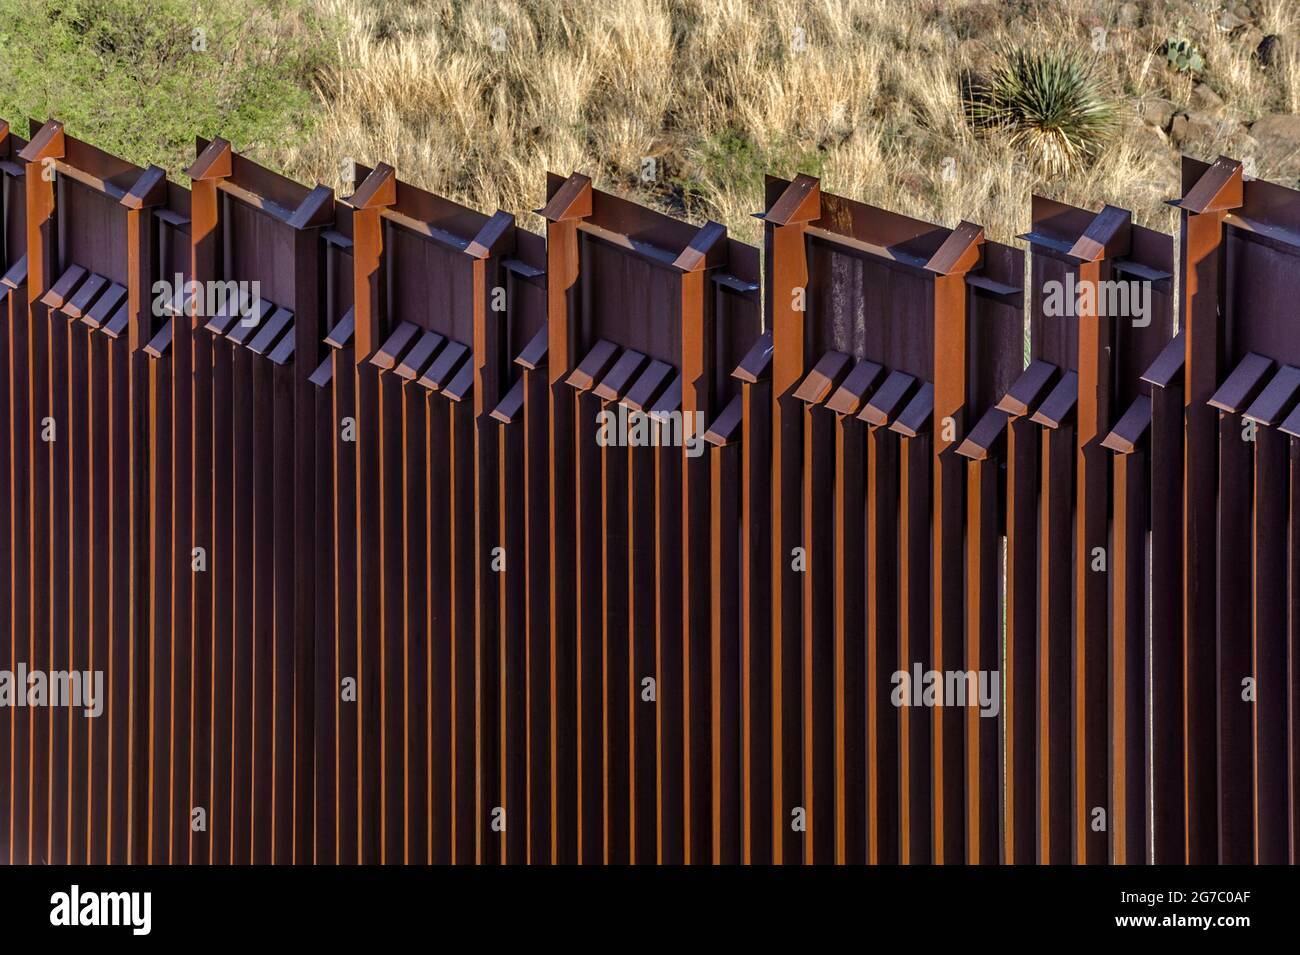 US border fence on the Mexico border, east of Nogales Arizona USA, and Nogales Sonora Mexico, viewed from US side. This view shows detail of top of fe Stock Photo